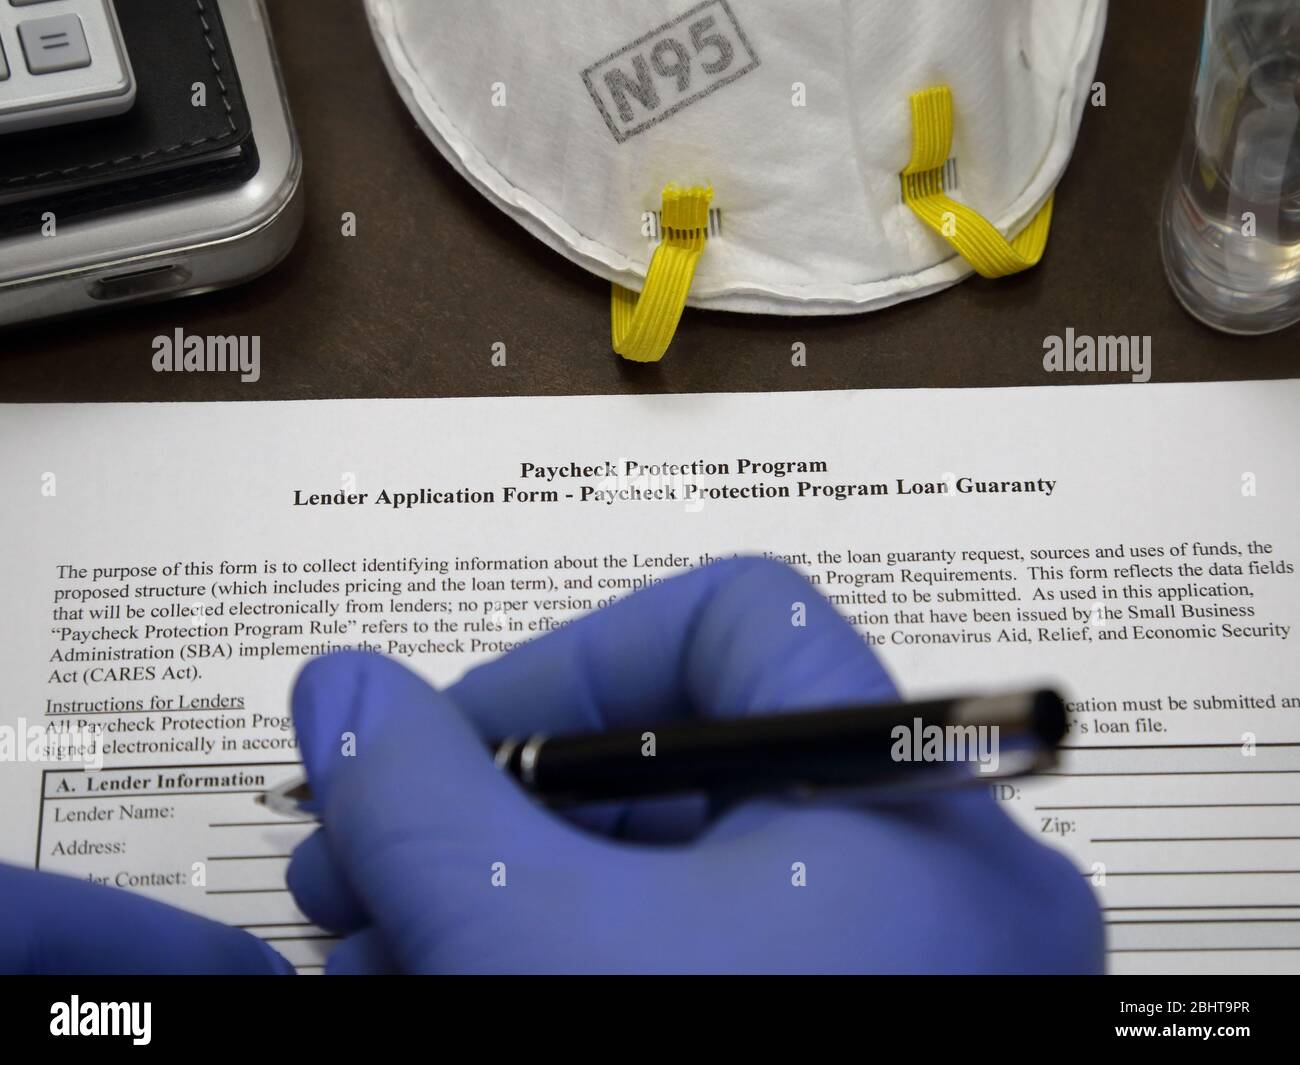 A rubber gloved hand is about to fill out a Paycheck Protection Program PPP loan form, provided by the USA government’s Small Business Administration. Stock Photo